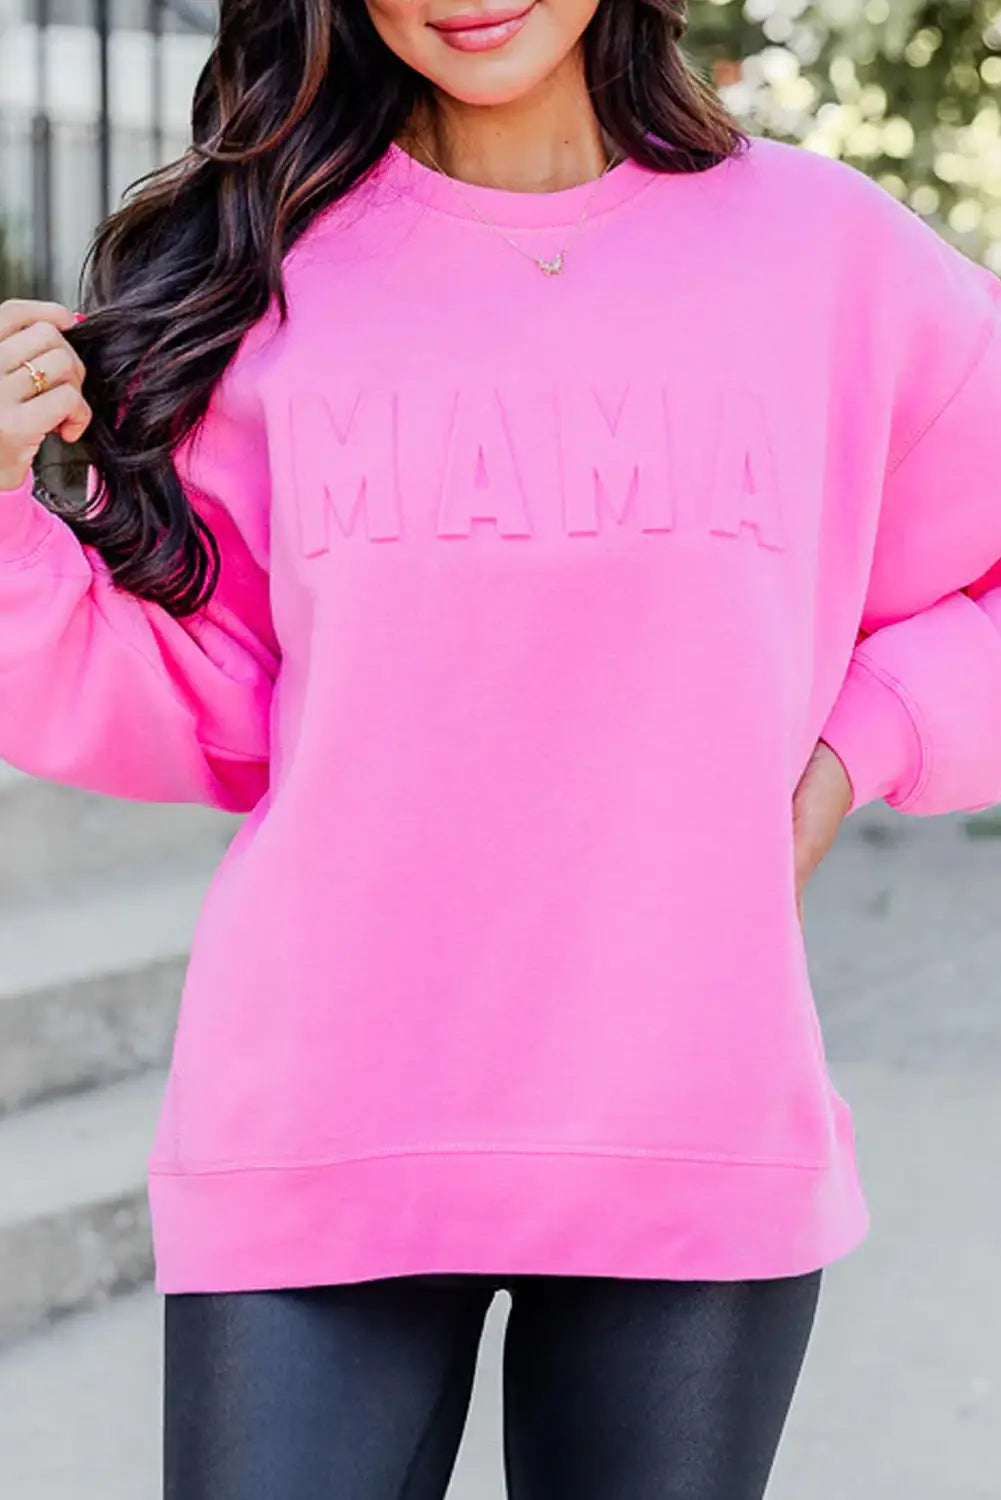 Bonbon coffee letter embossed casual sweatshirt - bright pink / s / 65% polyester + 35% cotton - tops